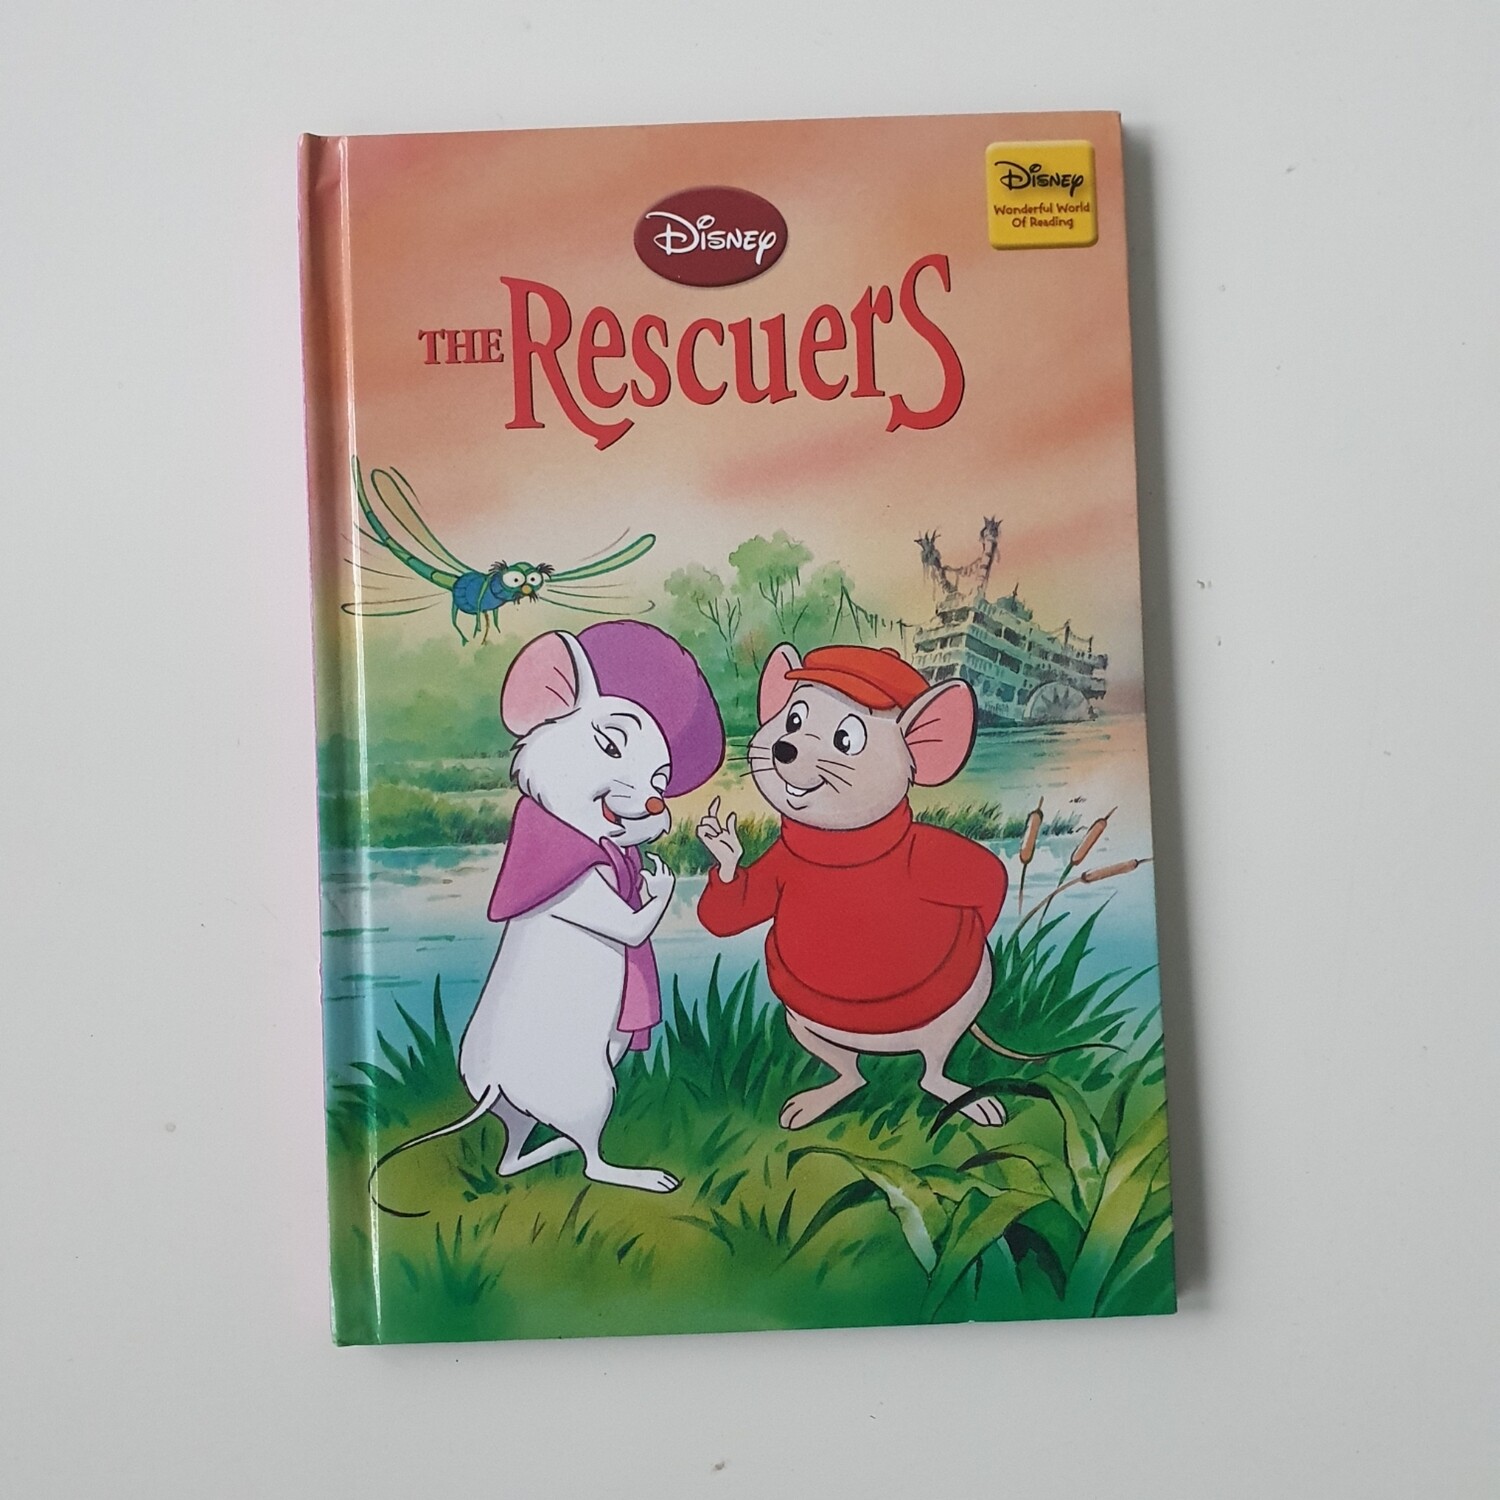 The Rescuers Notebook